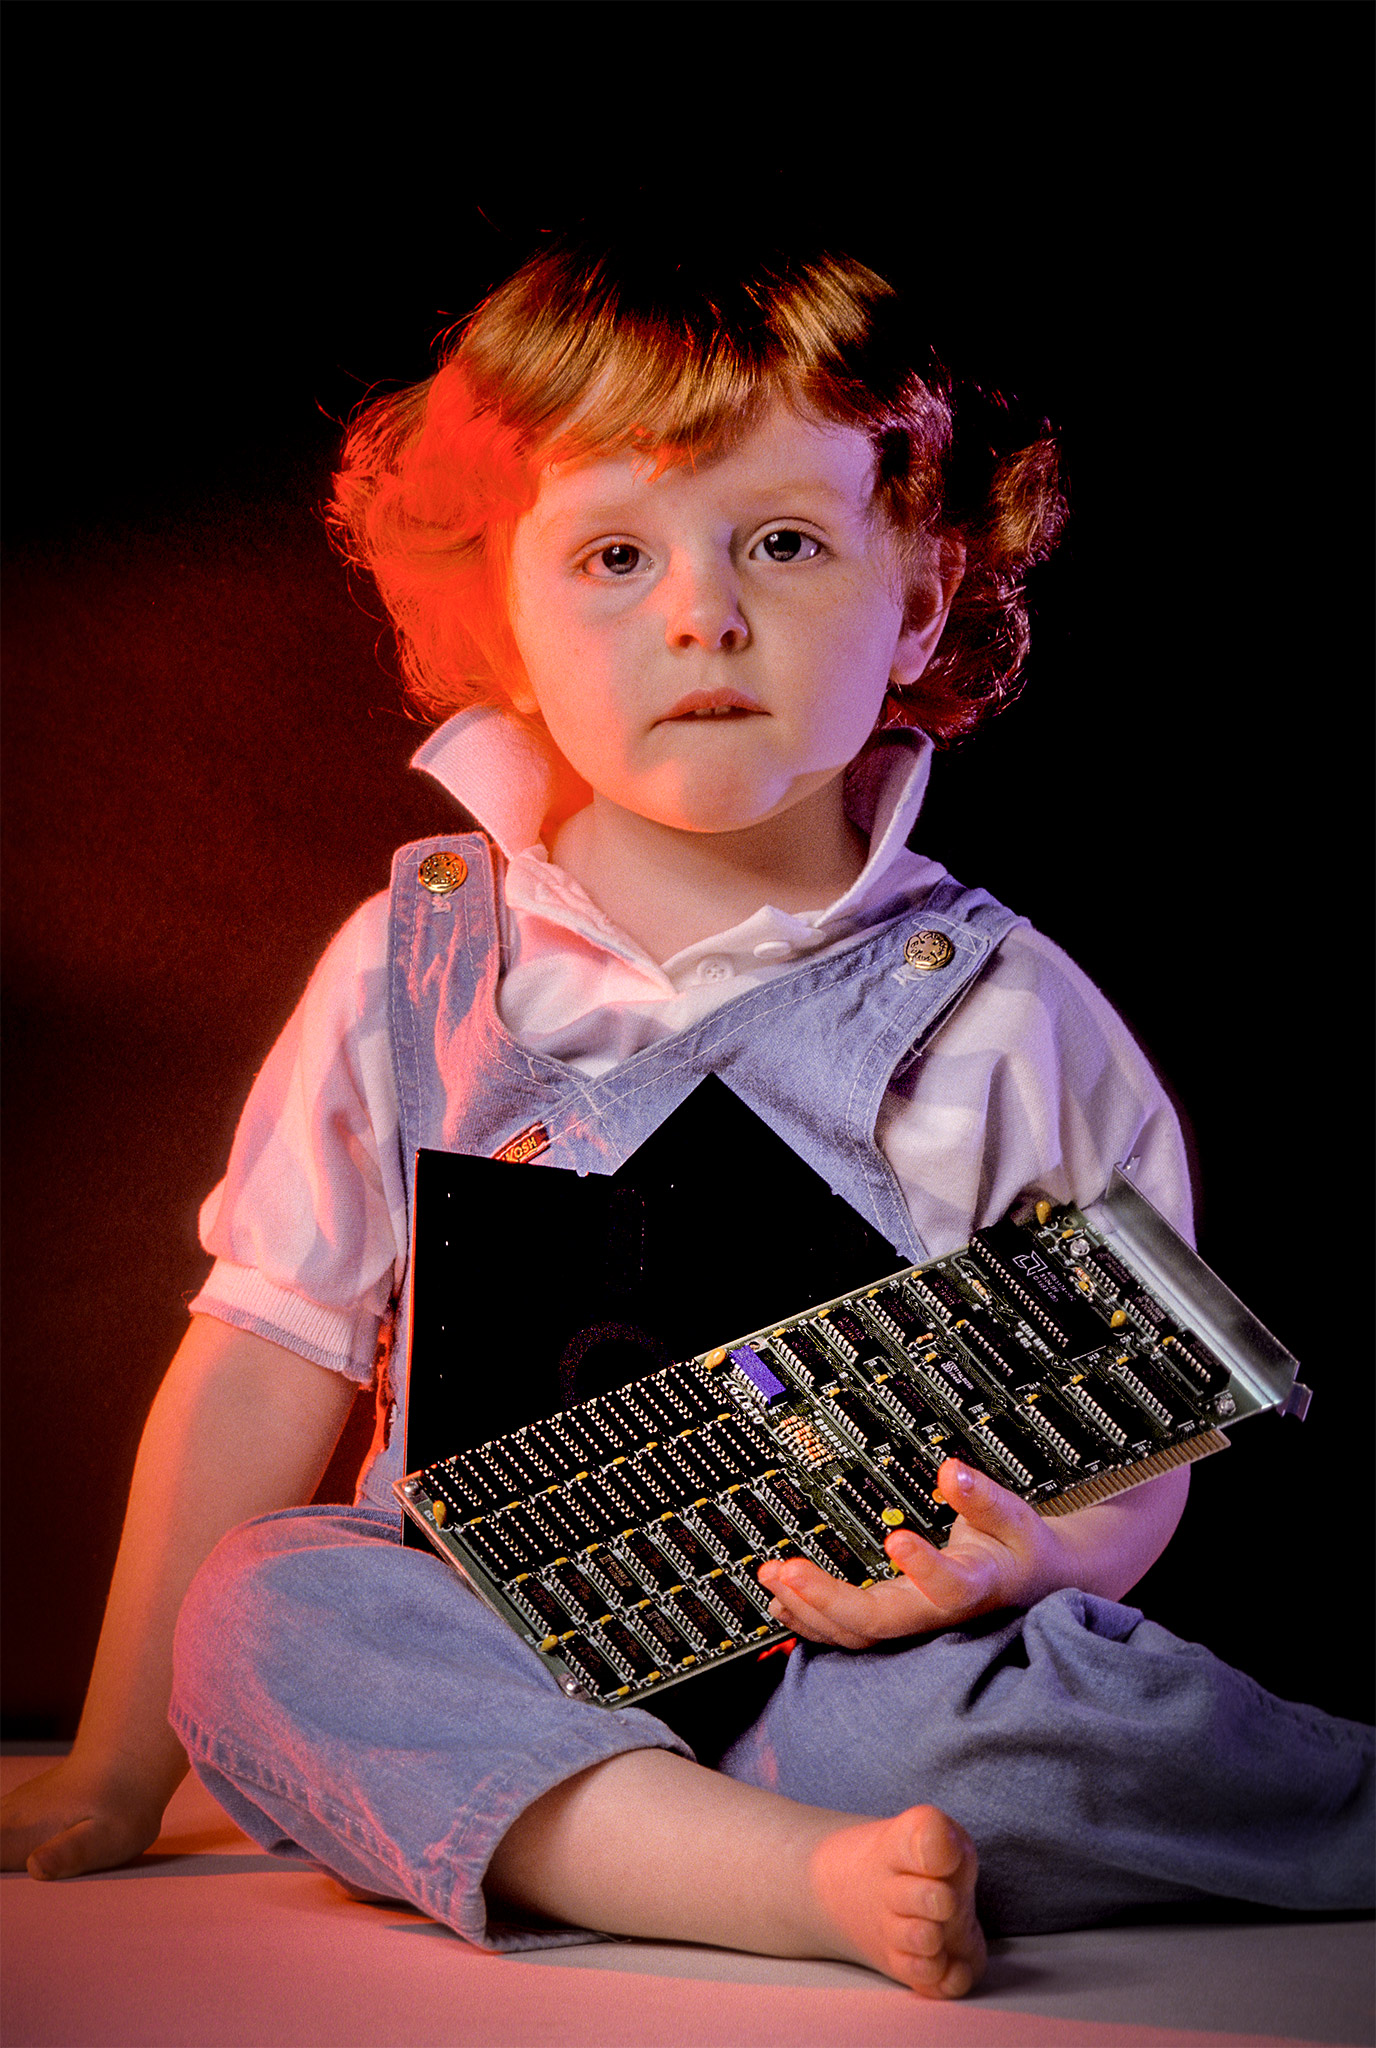 child with computer components